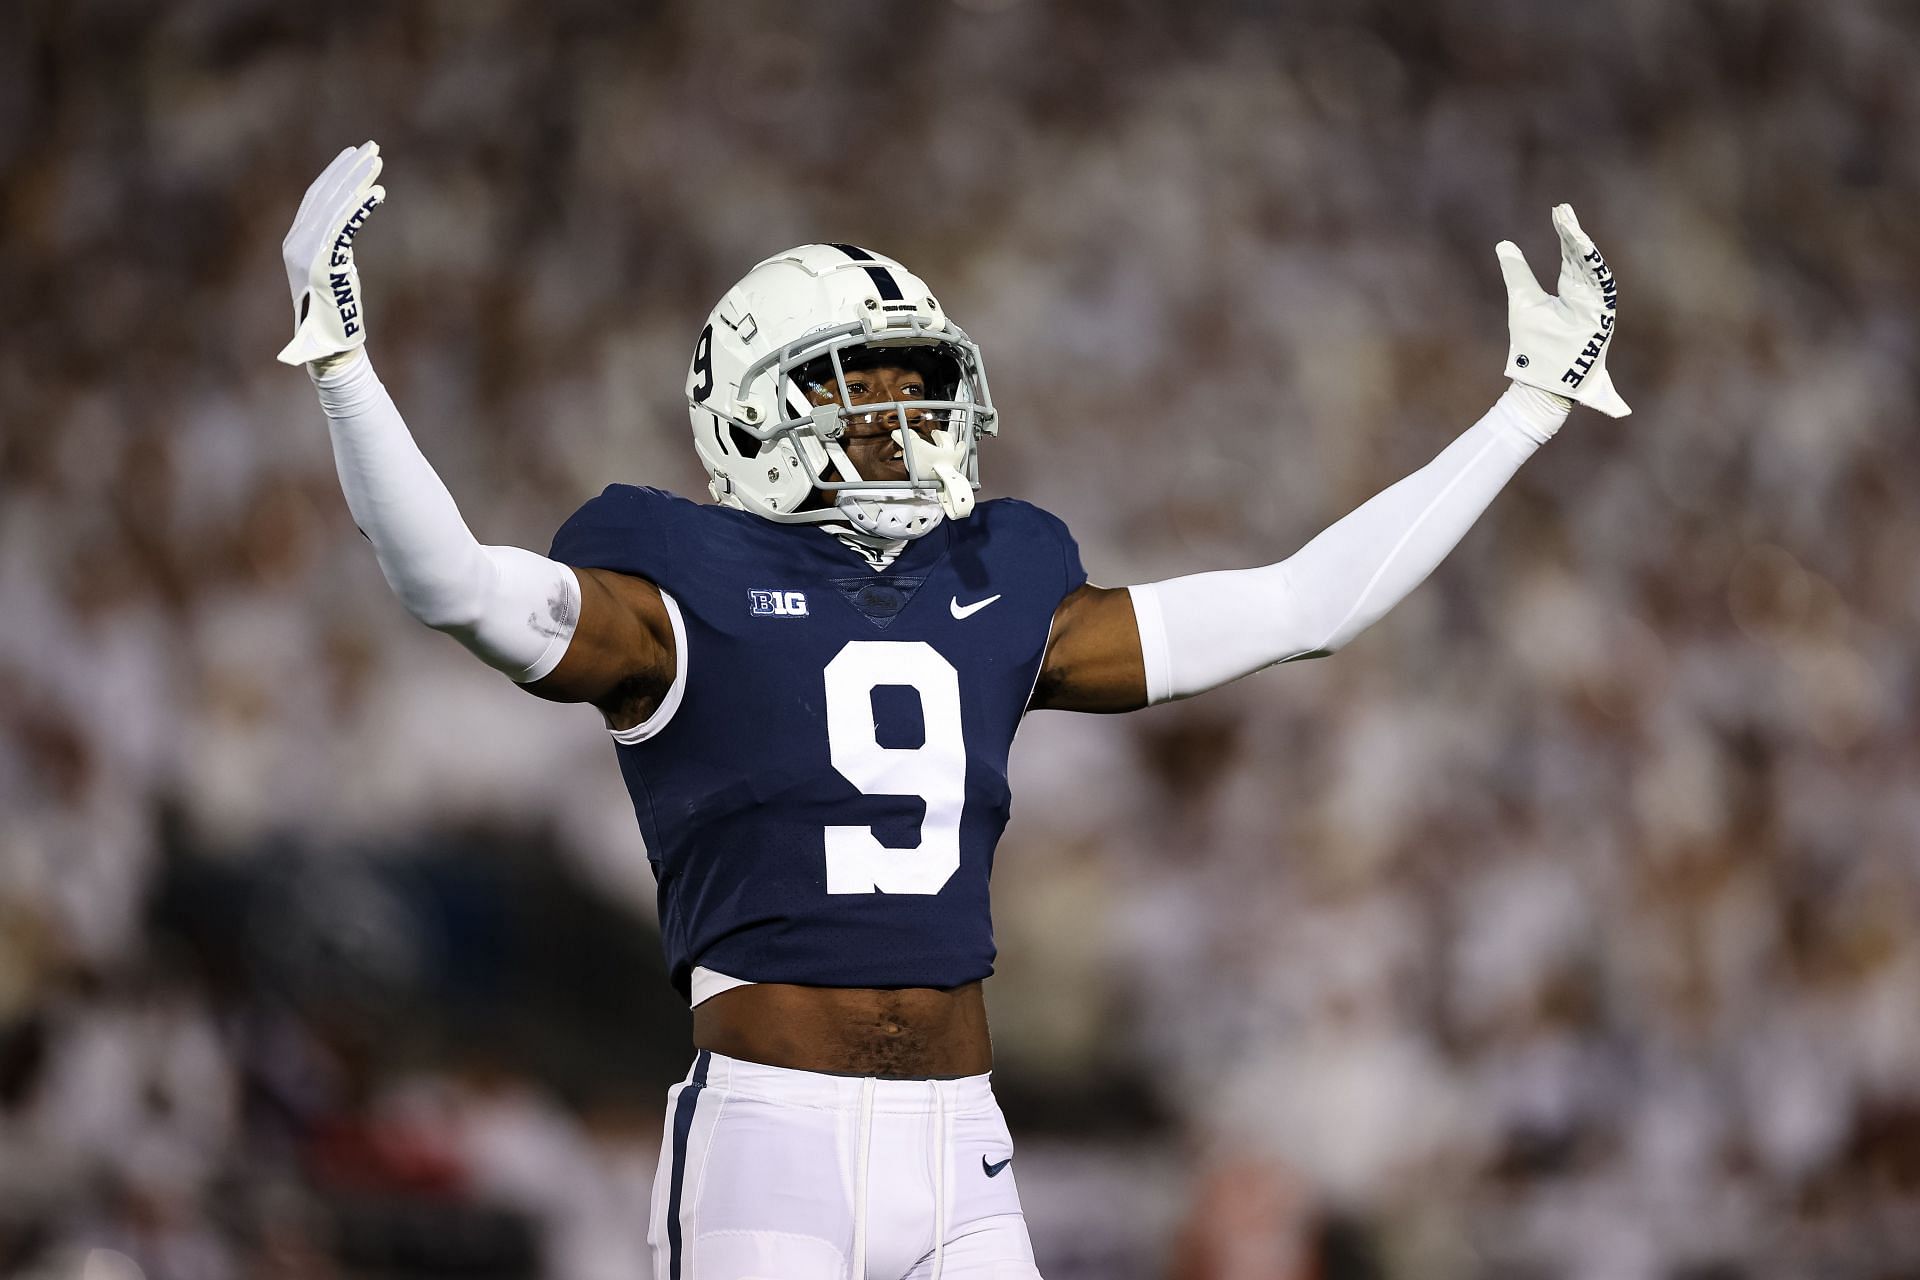 Joey Porter Jr. #9 of the Penn State Nittany Lions celebrates after a play against the Minnesota Golden Gophers